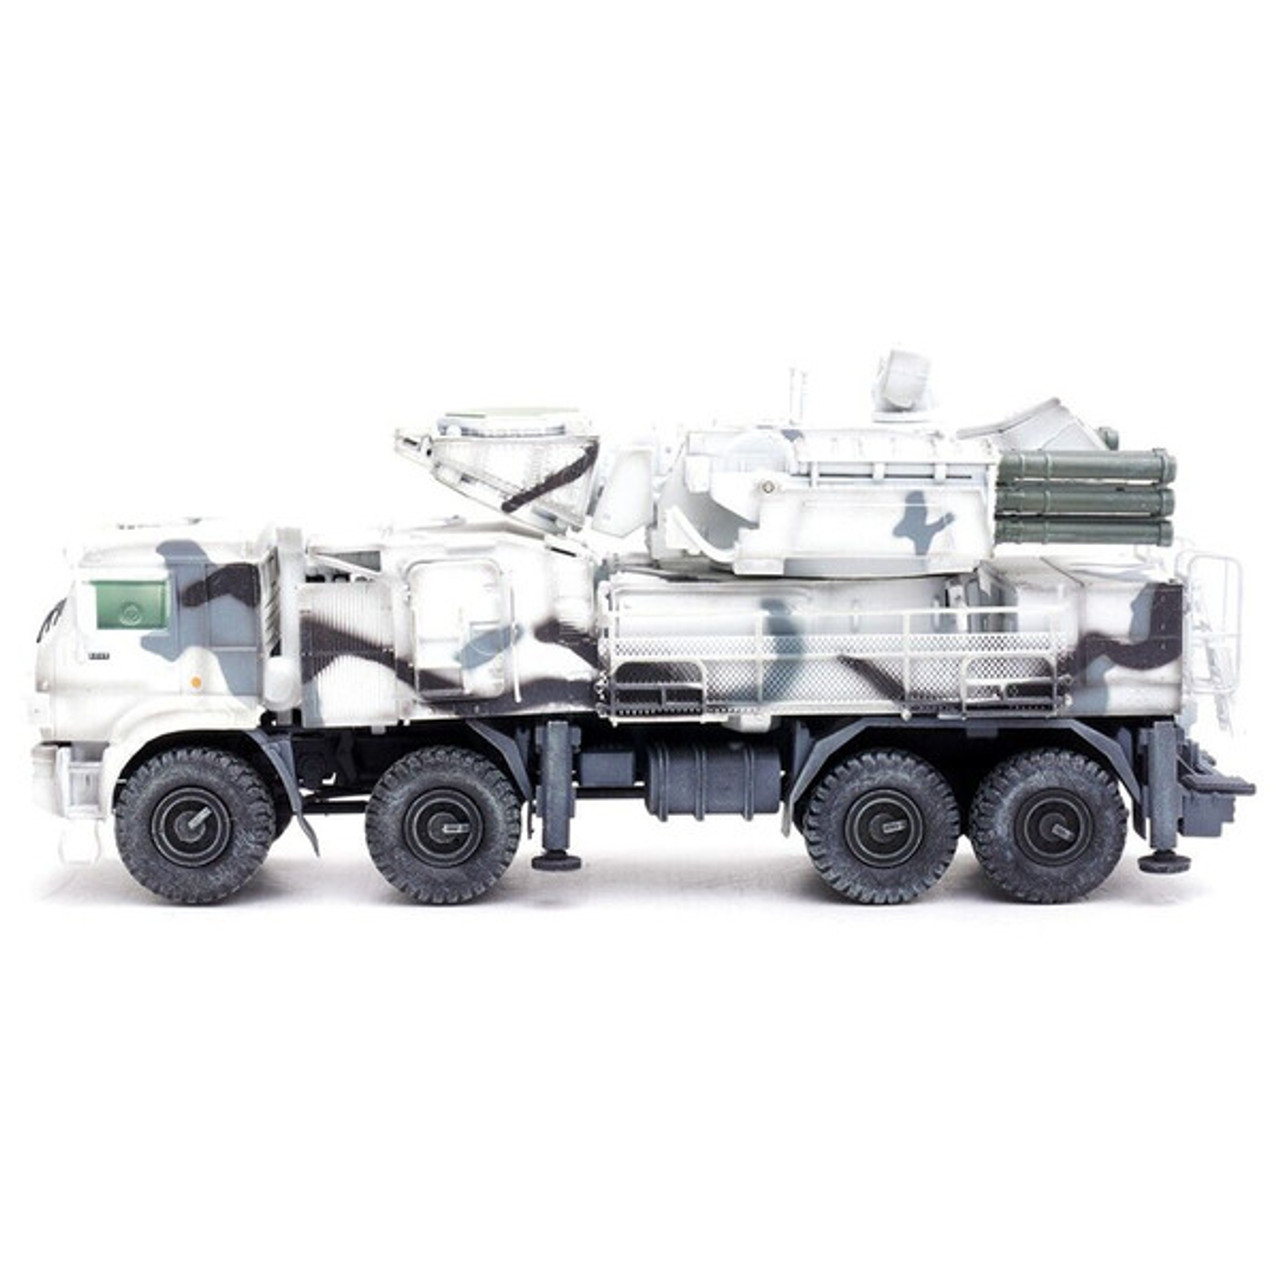 Pantsir S1 96K6 Self-Propelled Air Defense Weapon System Winter Camouflage "Russia's Arctic Forces" "Armor Premium" Series 1/72 Diecast Model by Panzerkampf